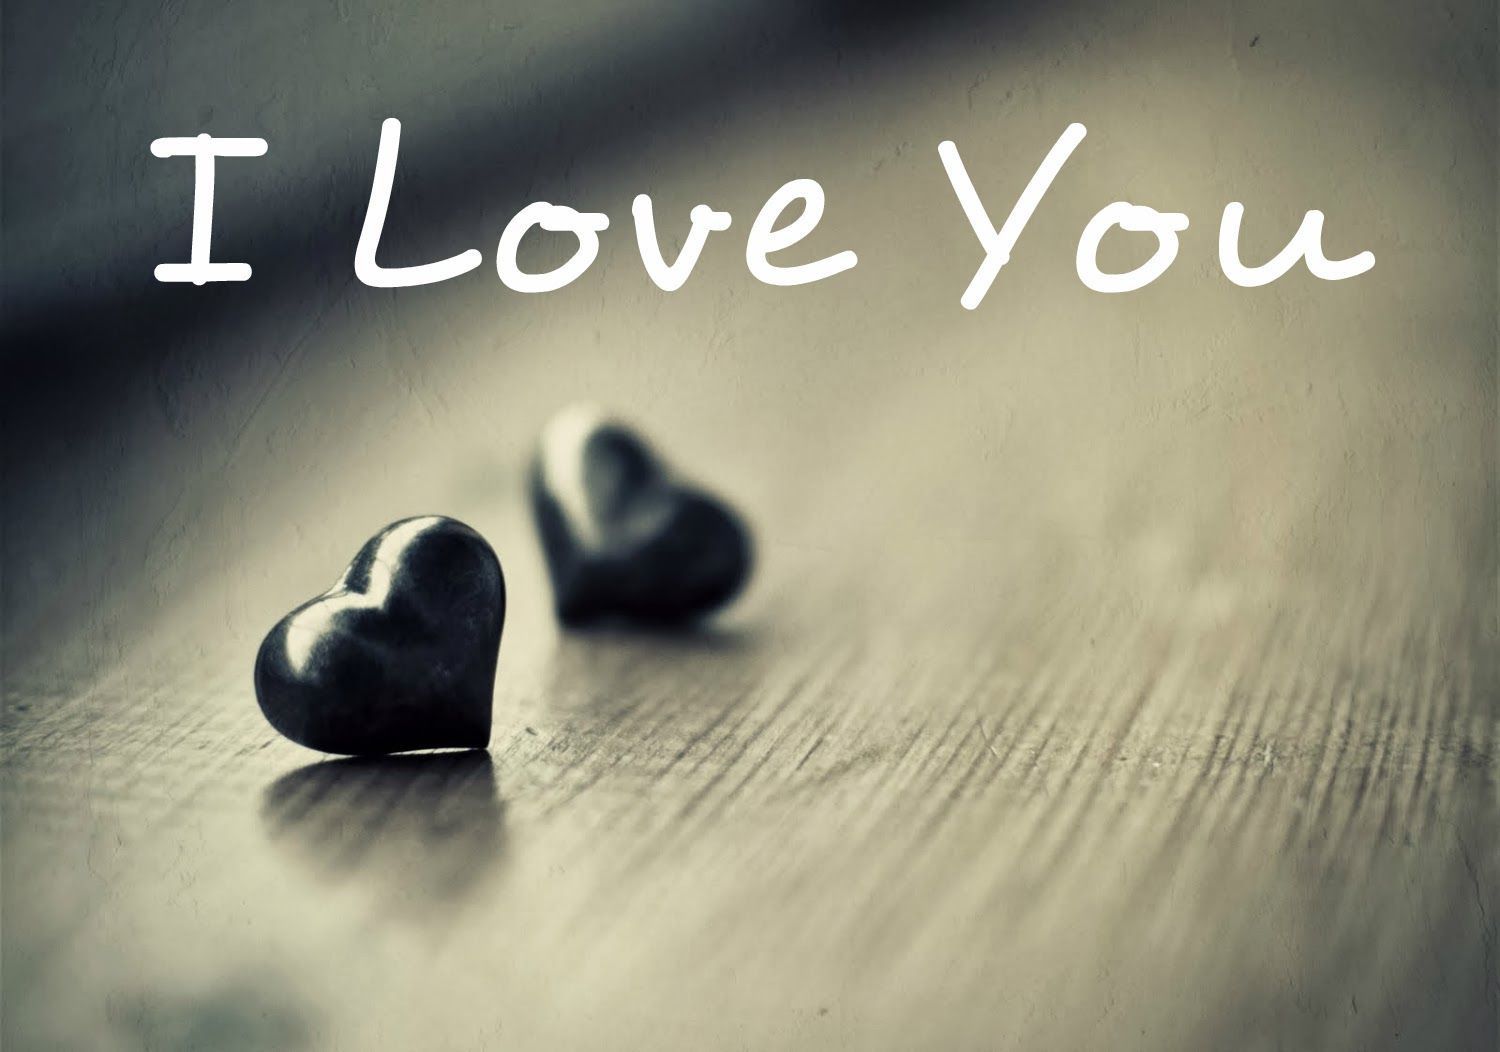 I Love You HD Images Wallpapers | I Love You Free Download Images ...